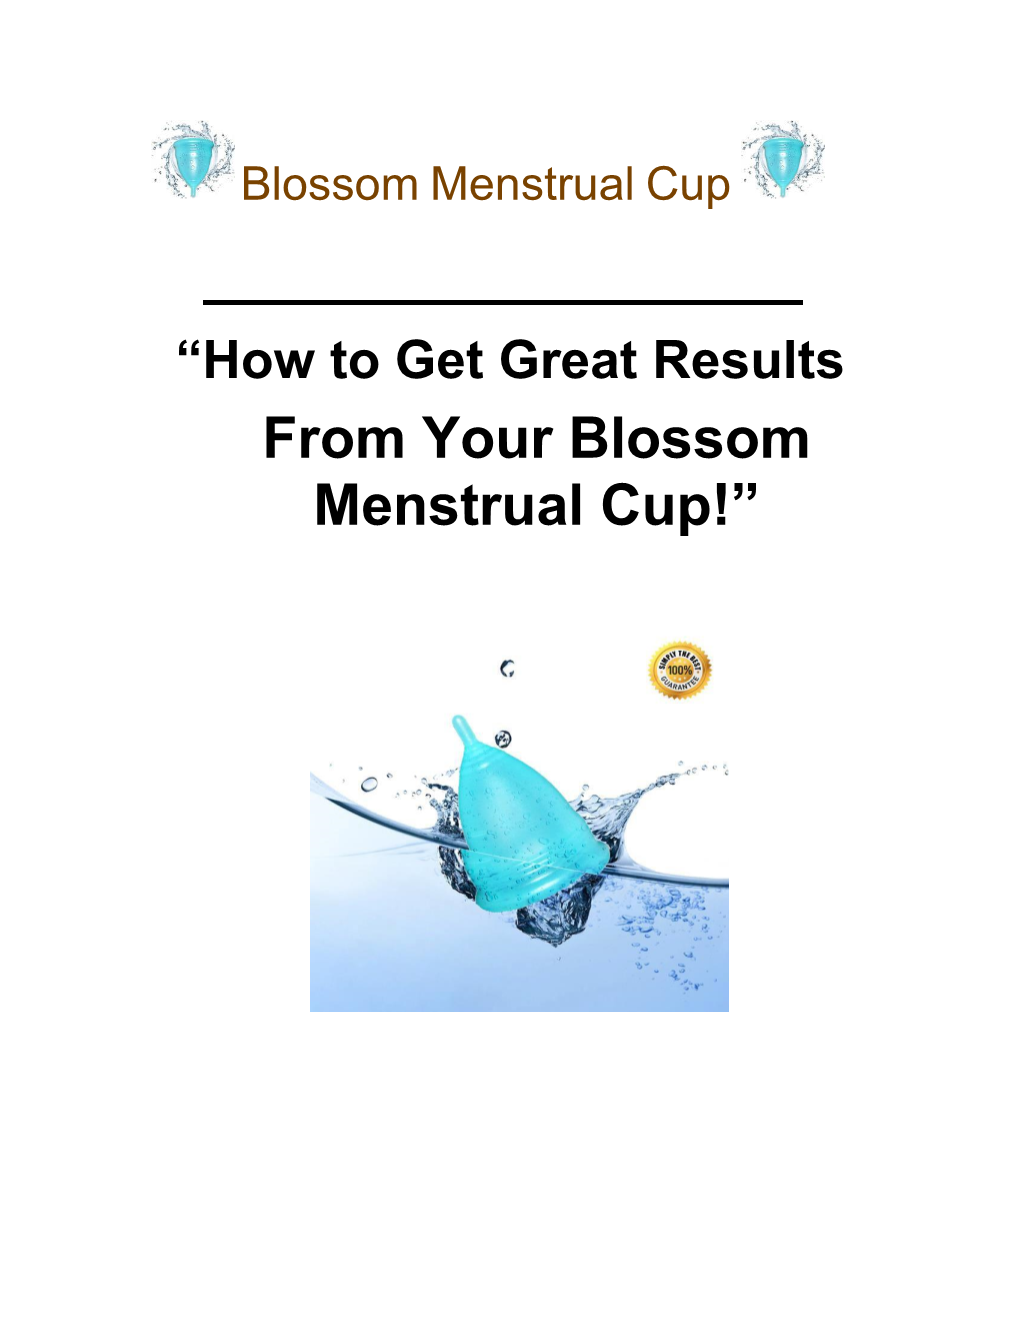 From Your Blossom Menstrual Cup!”